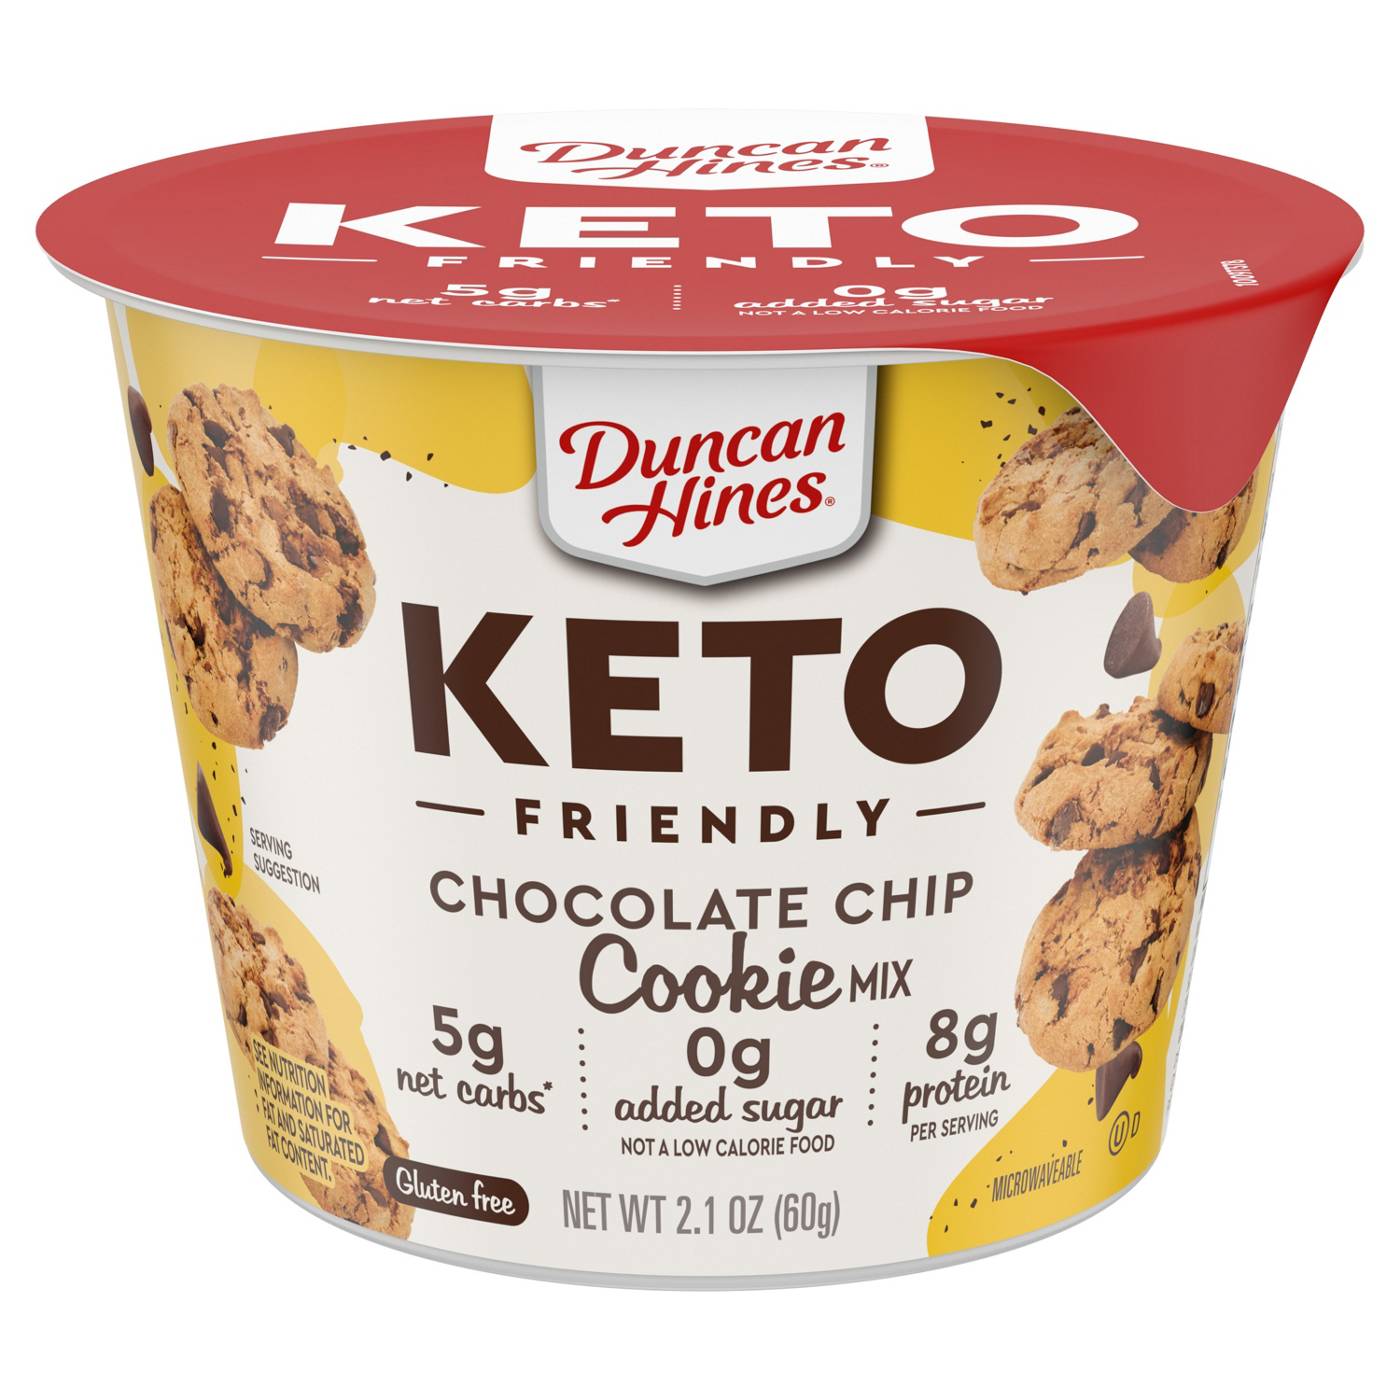 Duncan Hines Keto Friendly Chocolate Chip Cookie Mix Cup; image 1 of 7